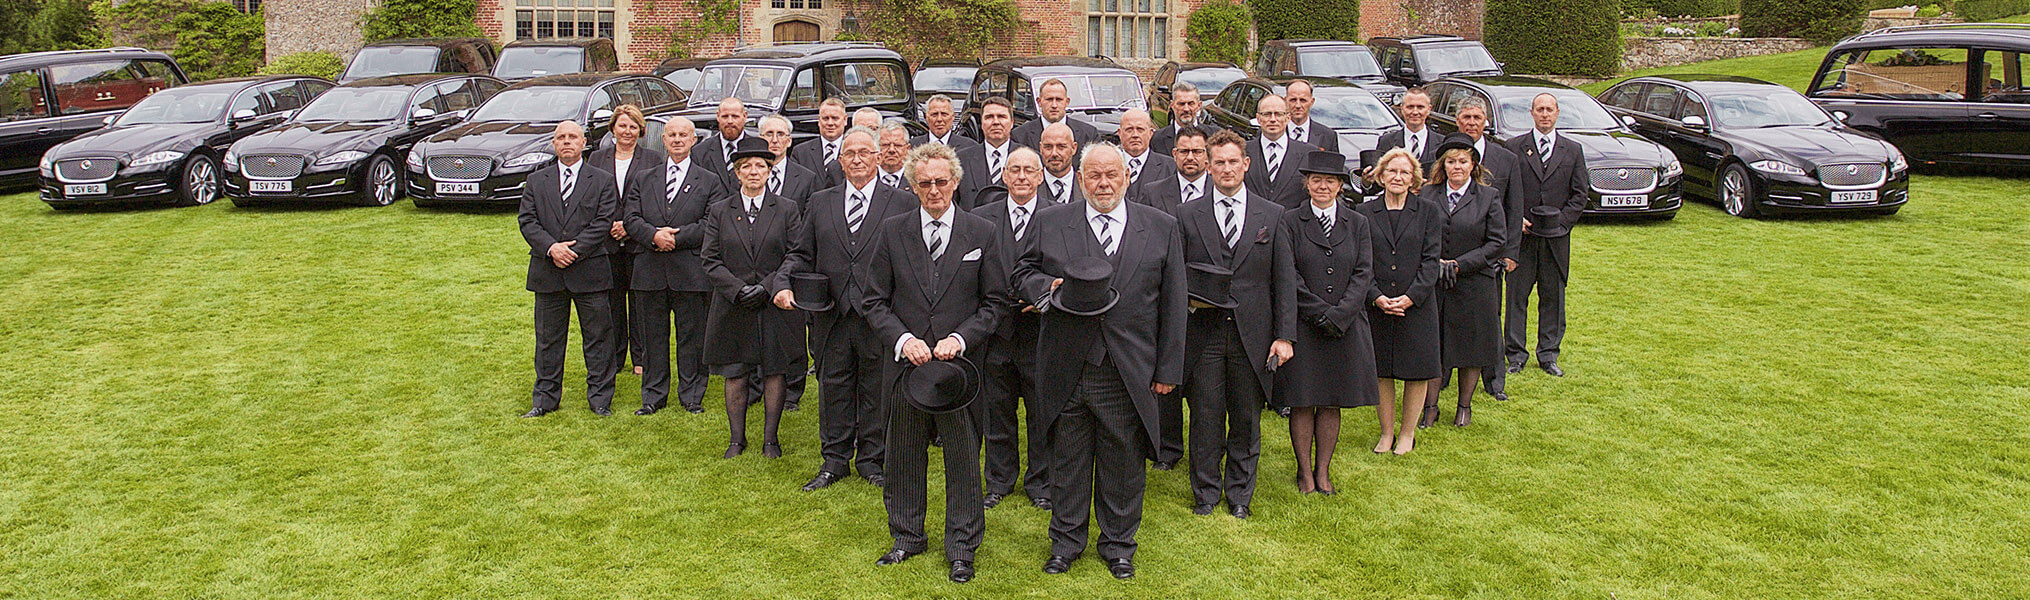 Funeral Directors standing in a group Infront of hearses